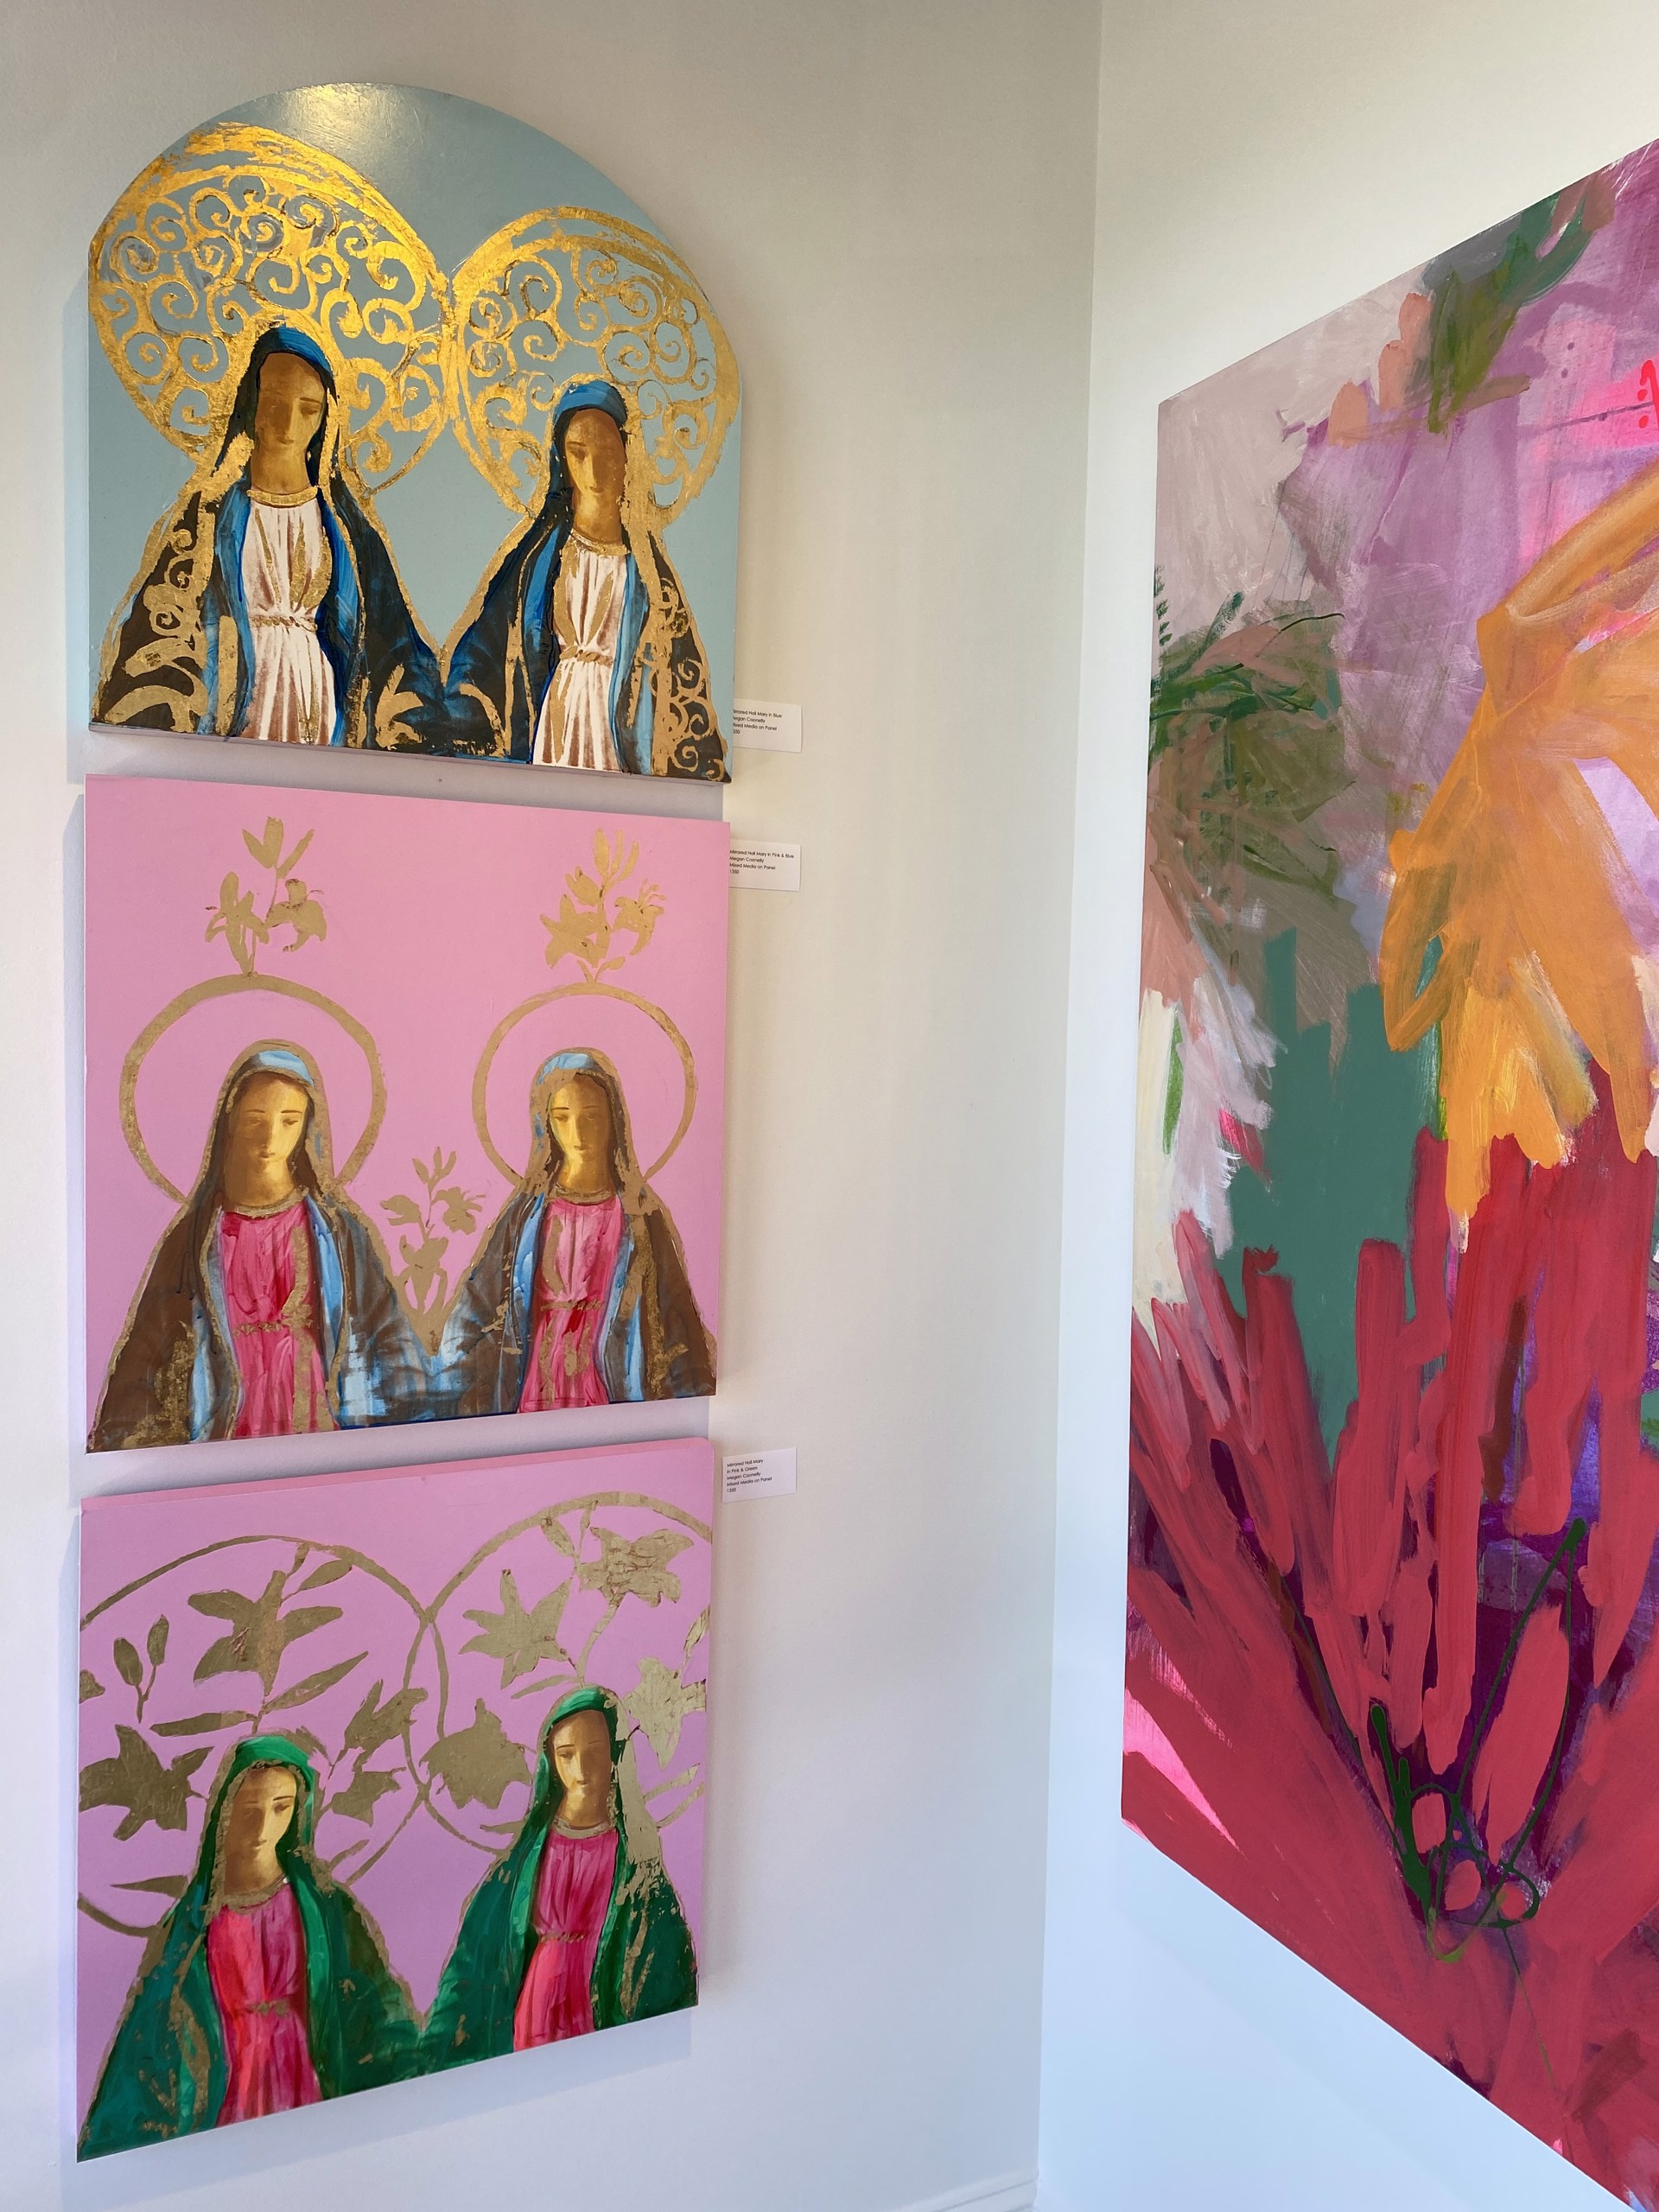 Mirrored Hail Mary in Pink and Green by Megan Coonelly